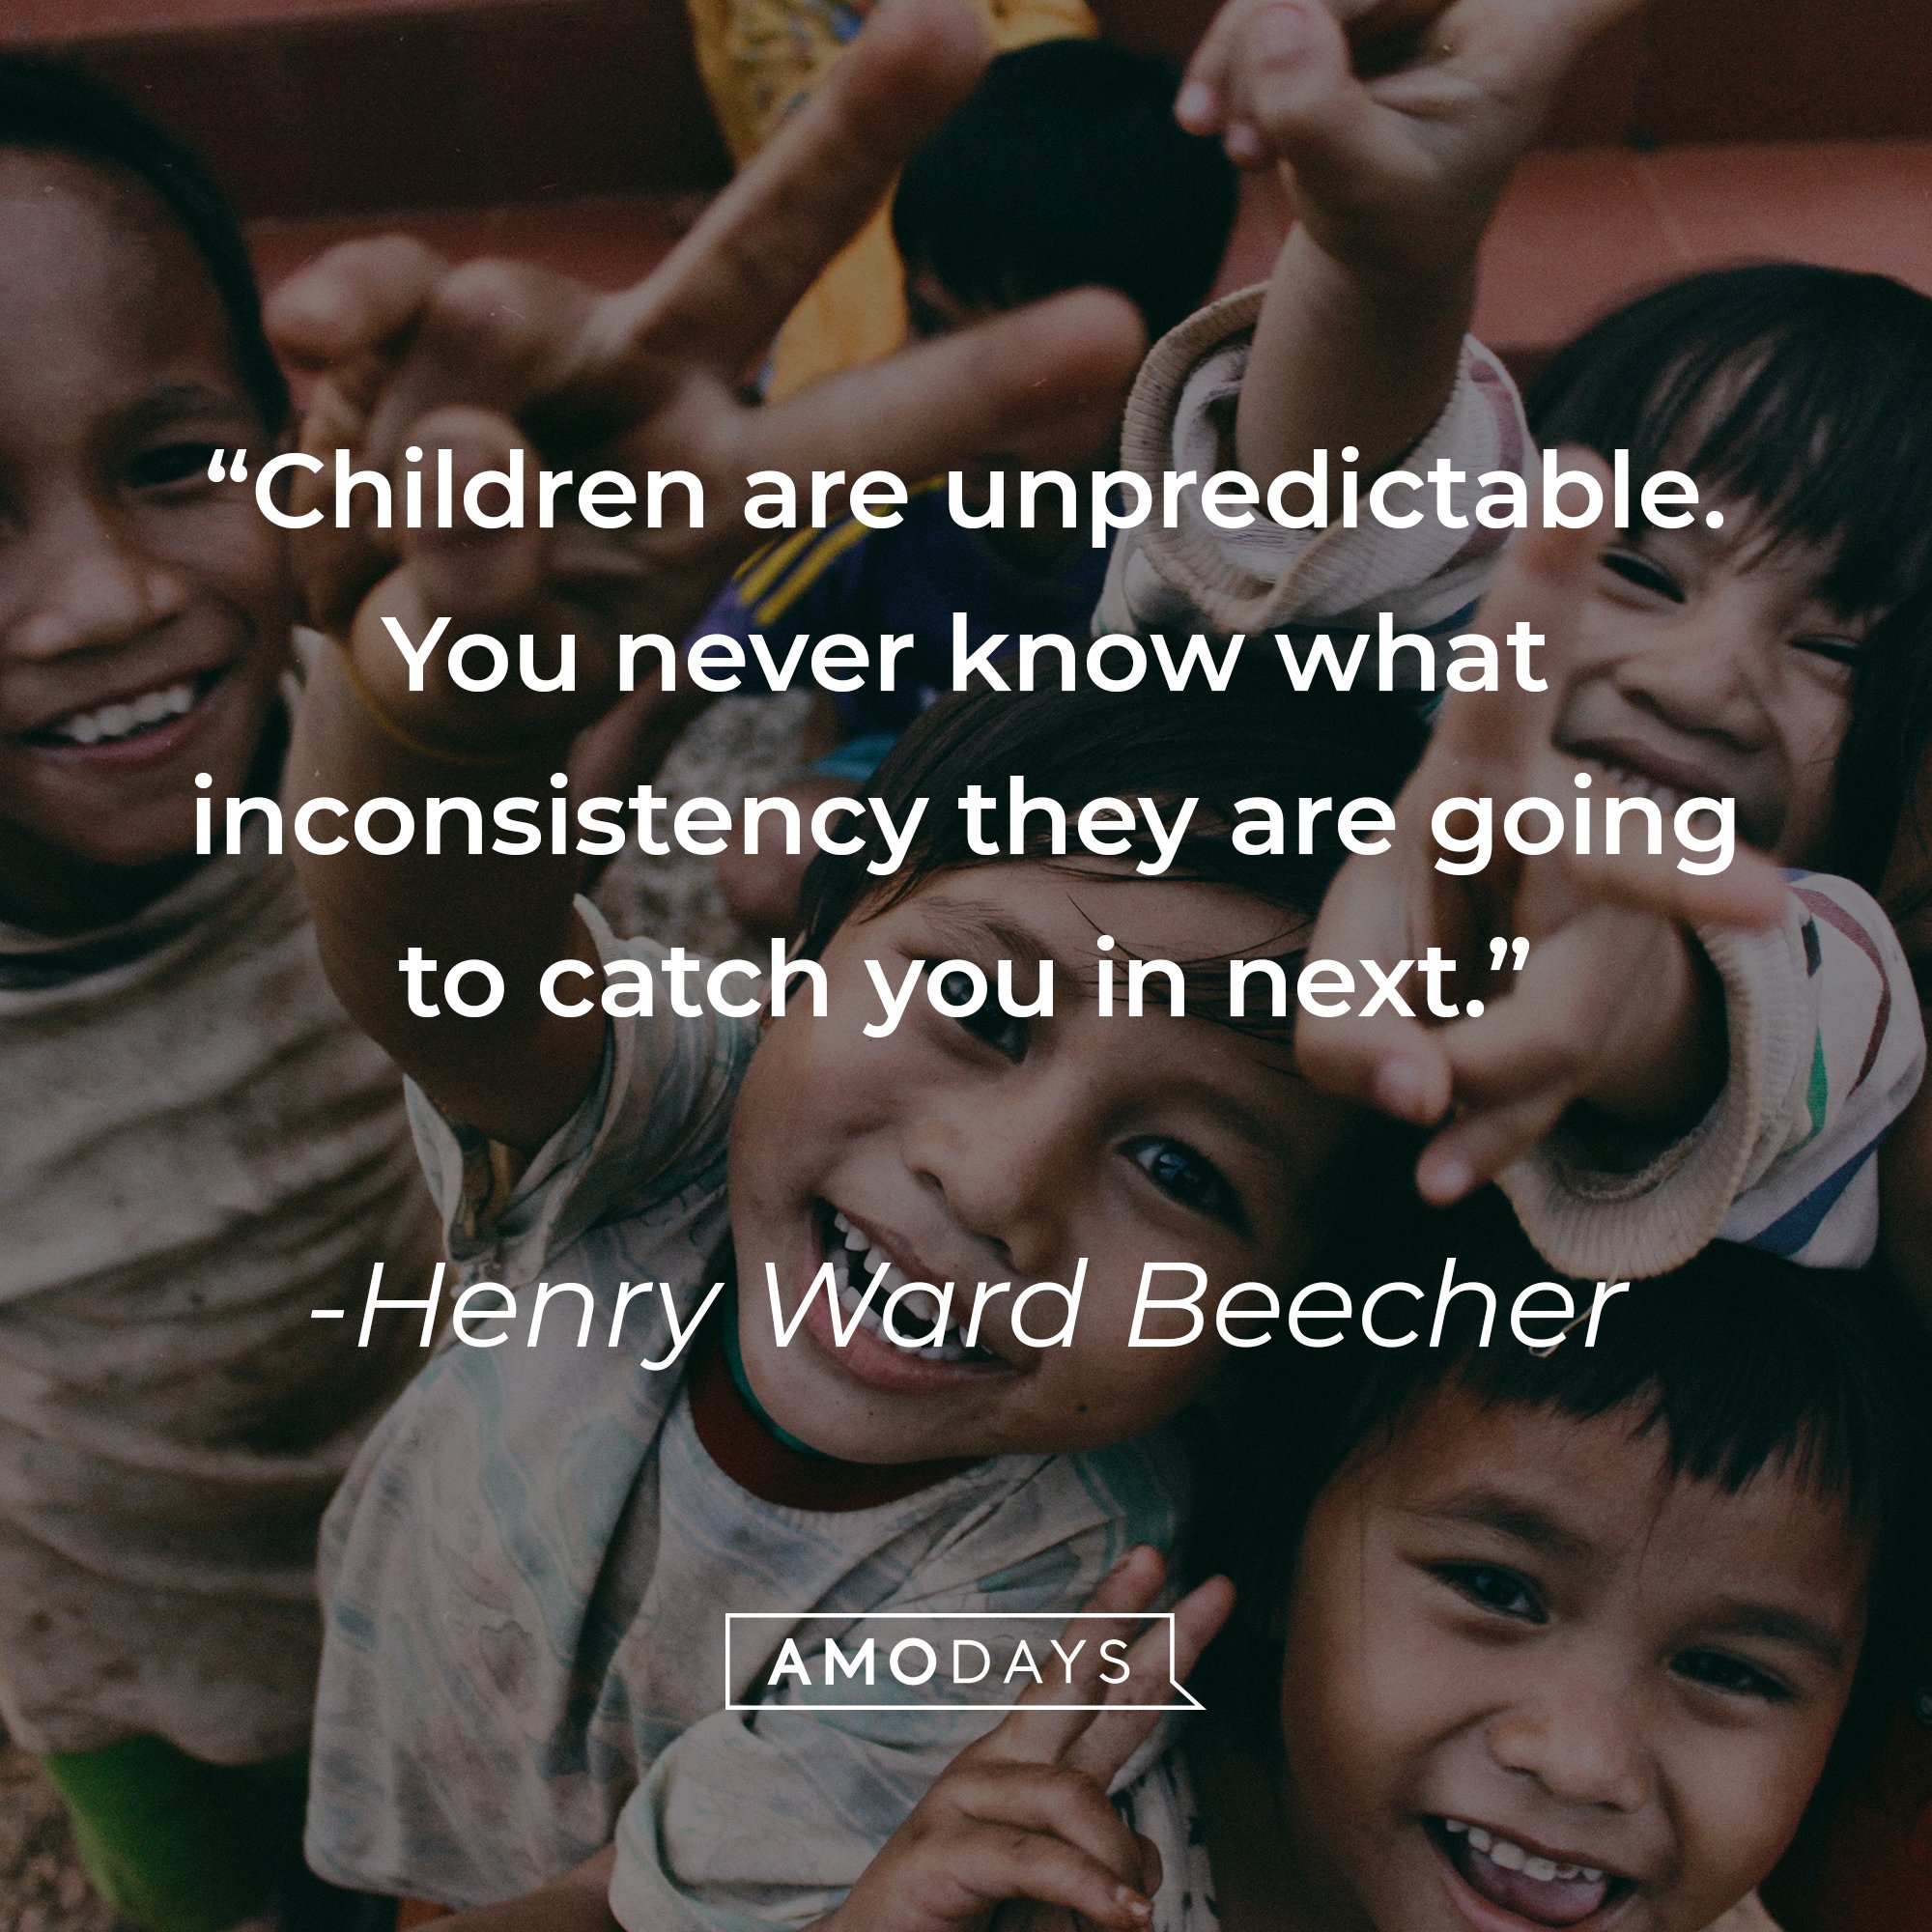 Henry Ward Beecher's quote: "Children are unpredictable. You never know what inconsistency they are going to catch you in next." | Image: AmoDays